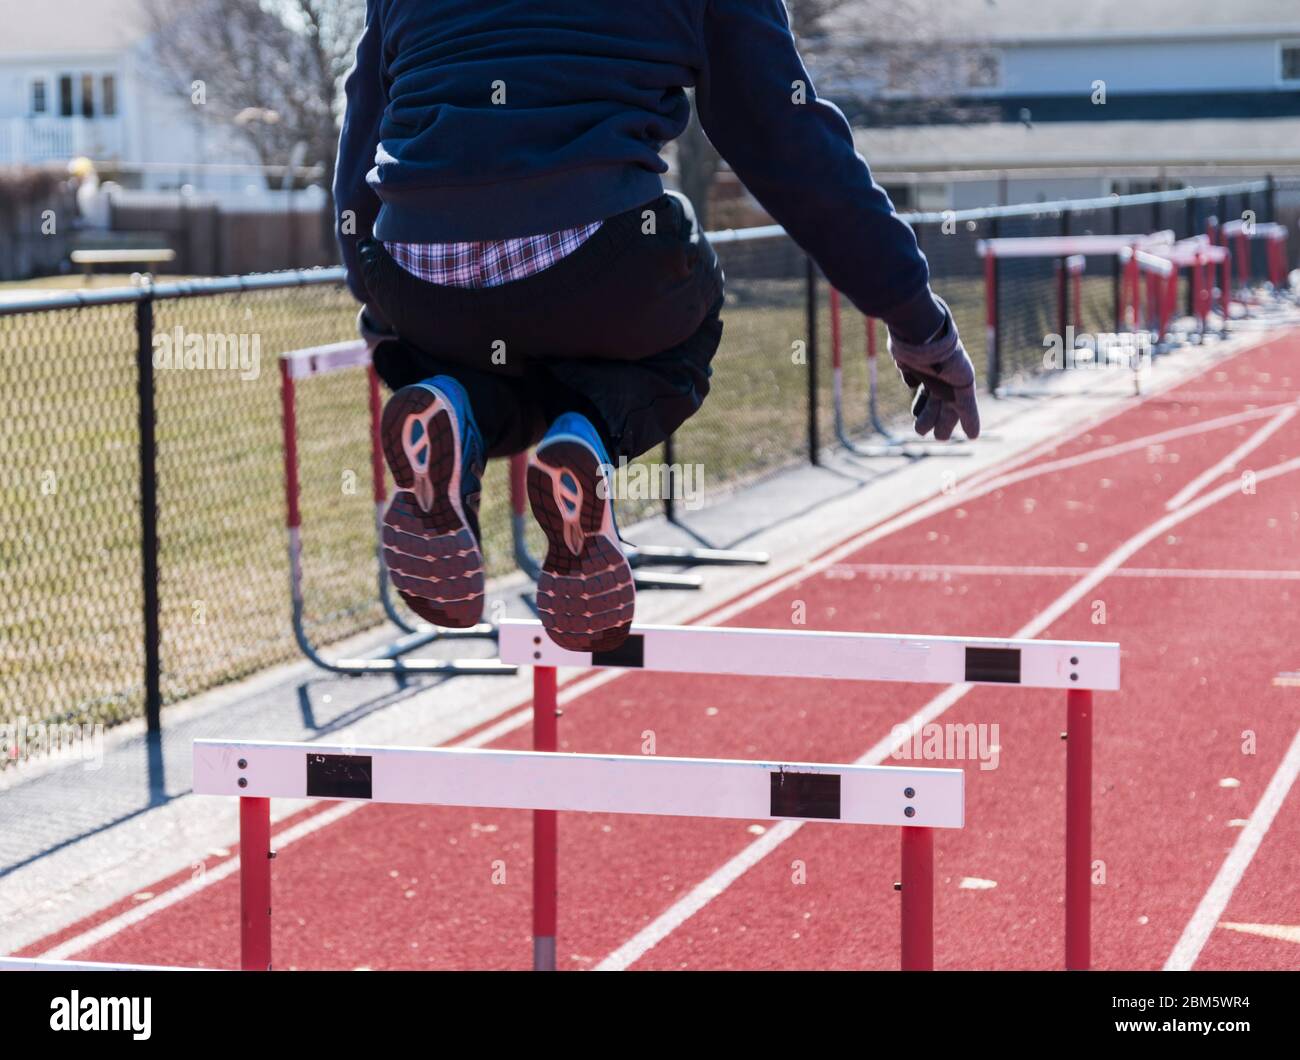 A high school male athlette is jumping over hurdles on a cold afternoon during track and field practice for strenght and speed training. Stock Photo